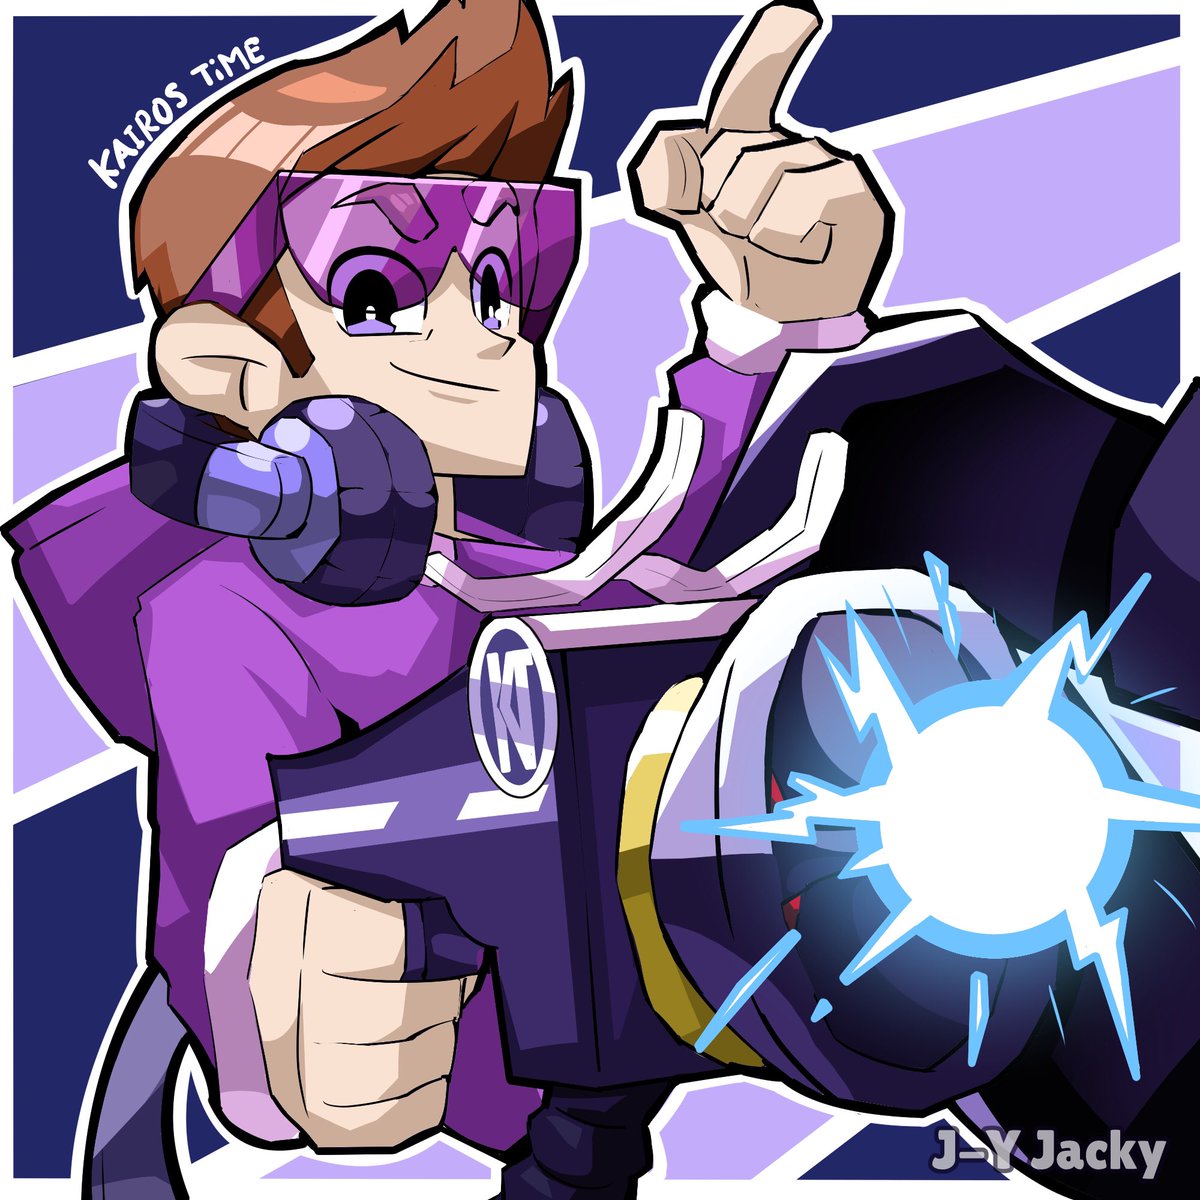 Kairostime Gaming On Twitter Make Me Into A Brawlstars Brawler Name My Attack Super Gadget Star Power Thank You To Jy Jacky3024 For The Artwork Https T Co 4wg36nqtq0